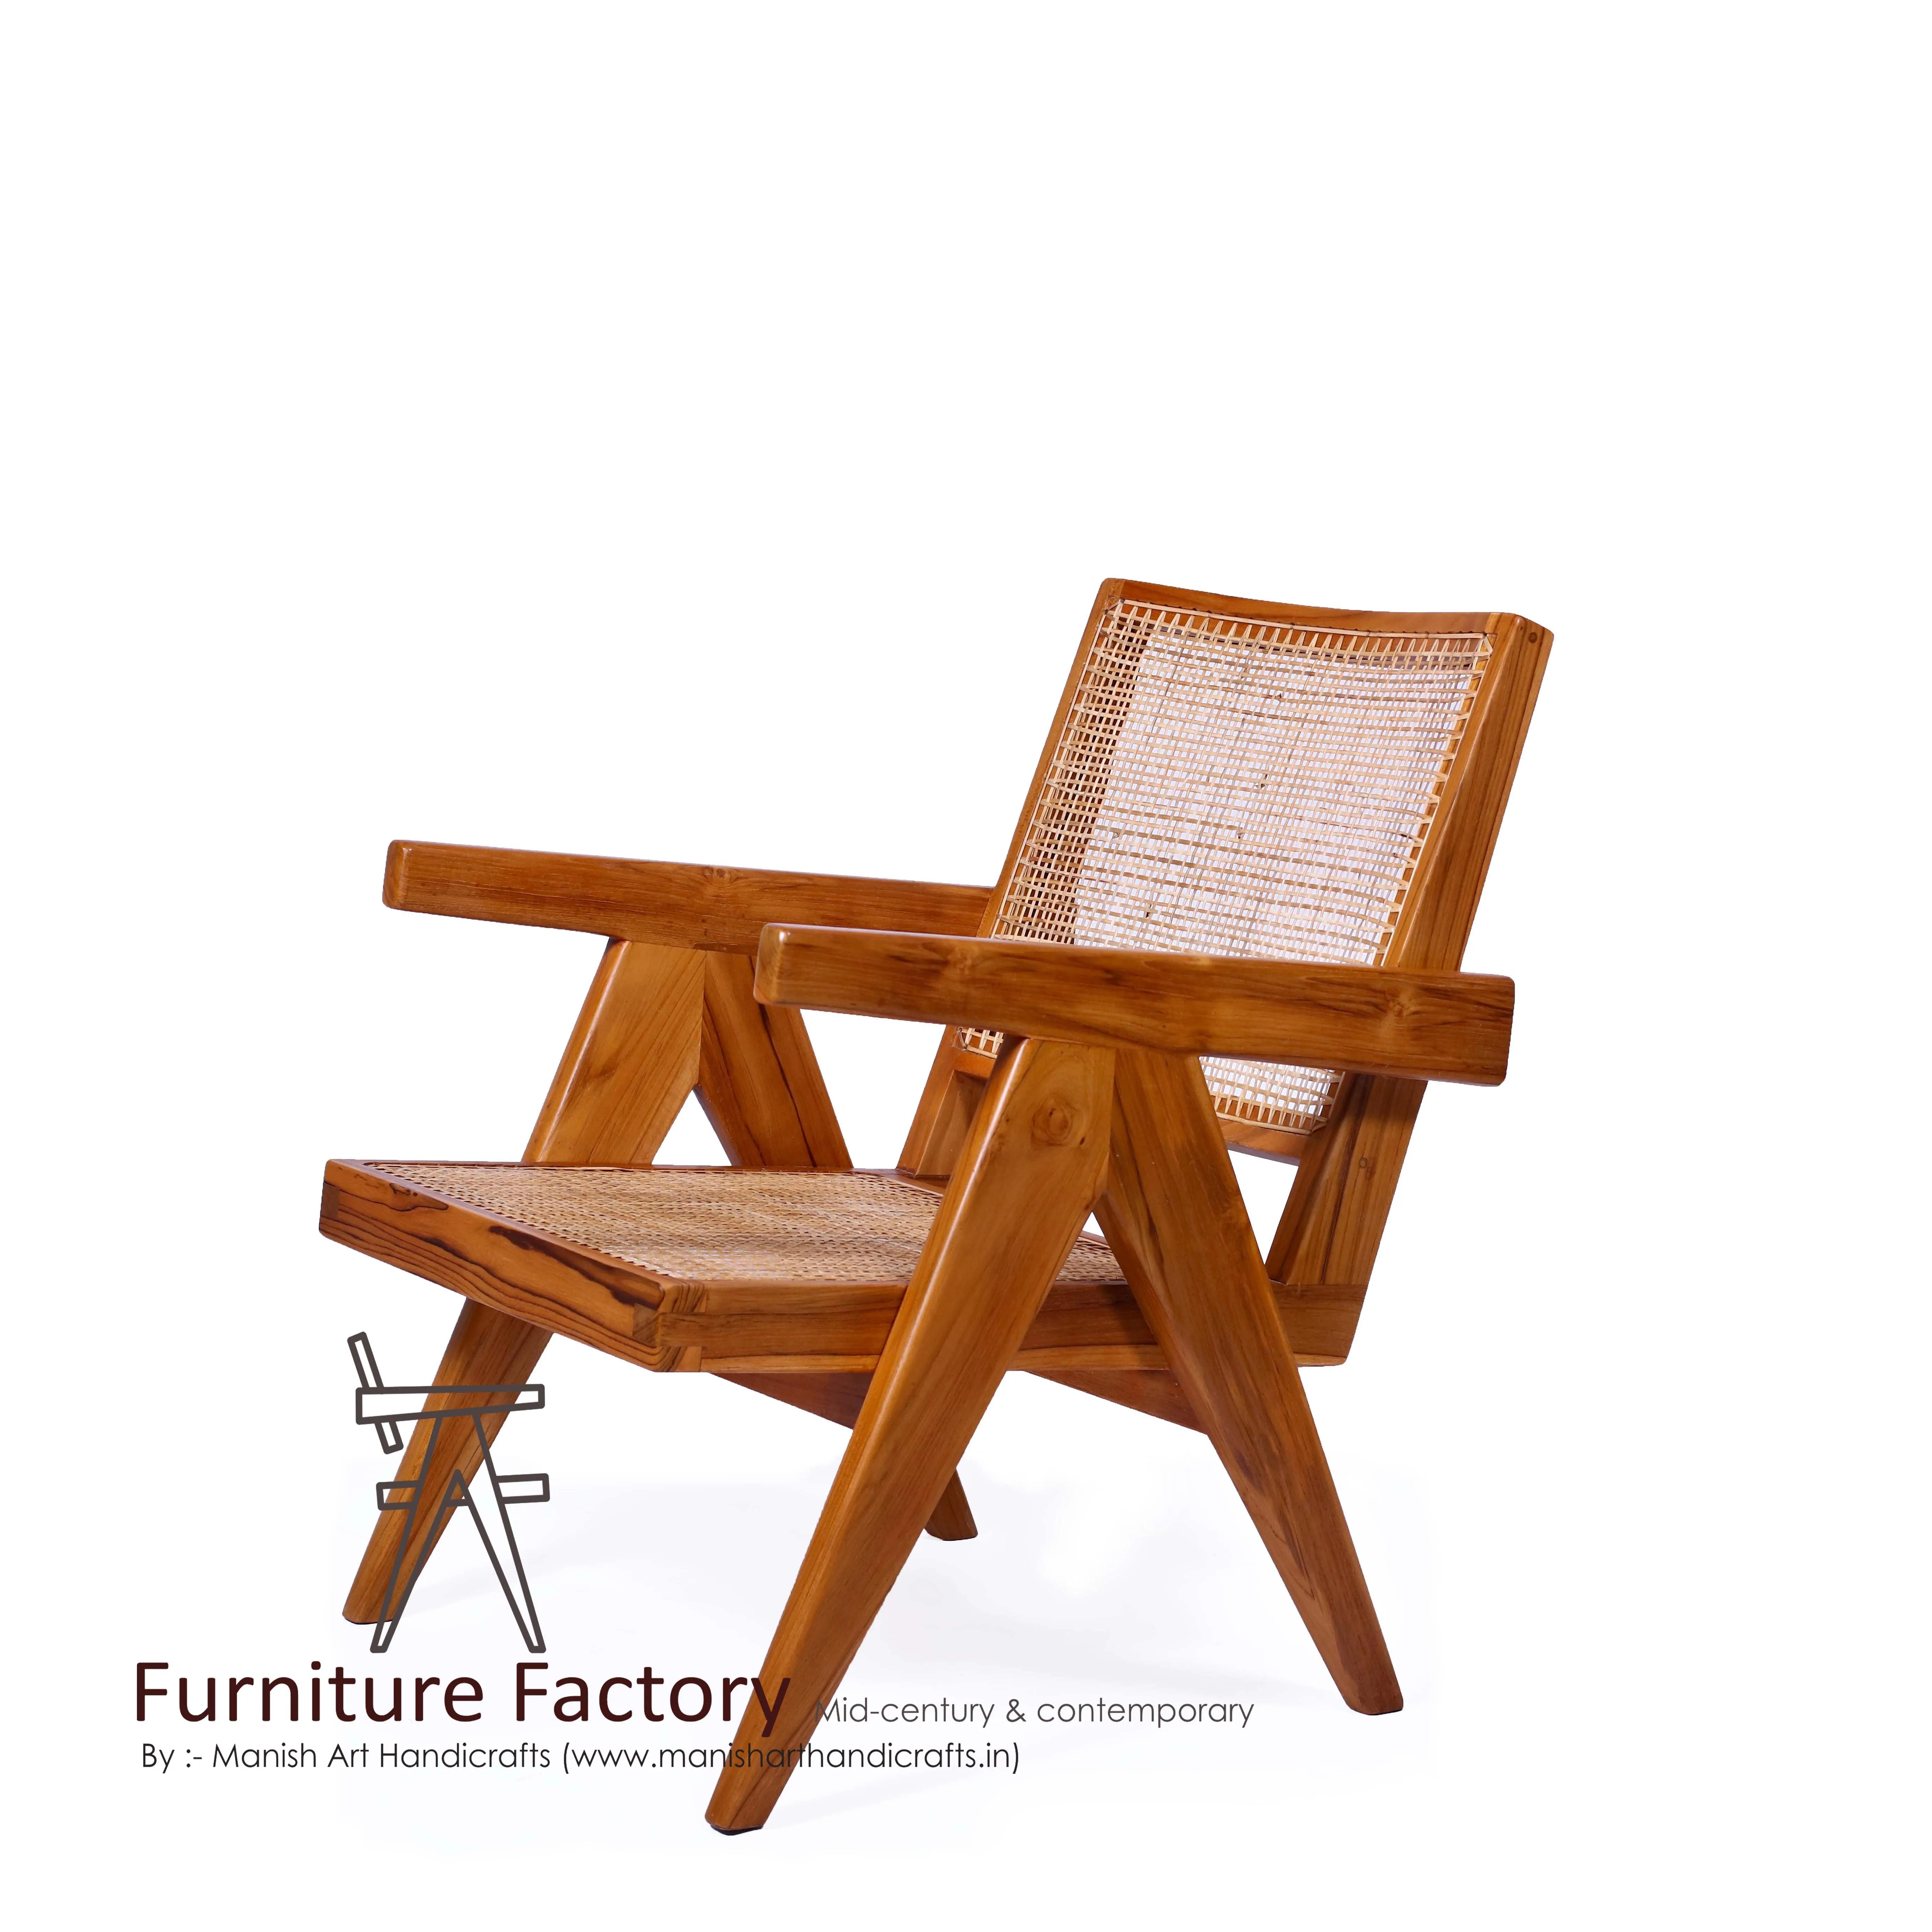 pierre jeanneret le corbusier low easy chair high quality natural rattan  and teak wood  buy pierre jeanneret kangaroo chair student chair  chandigarh